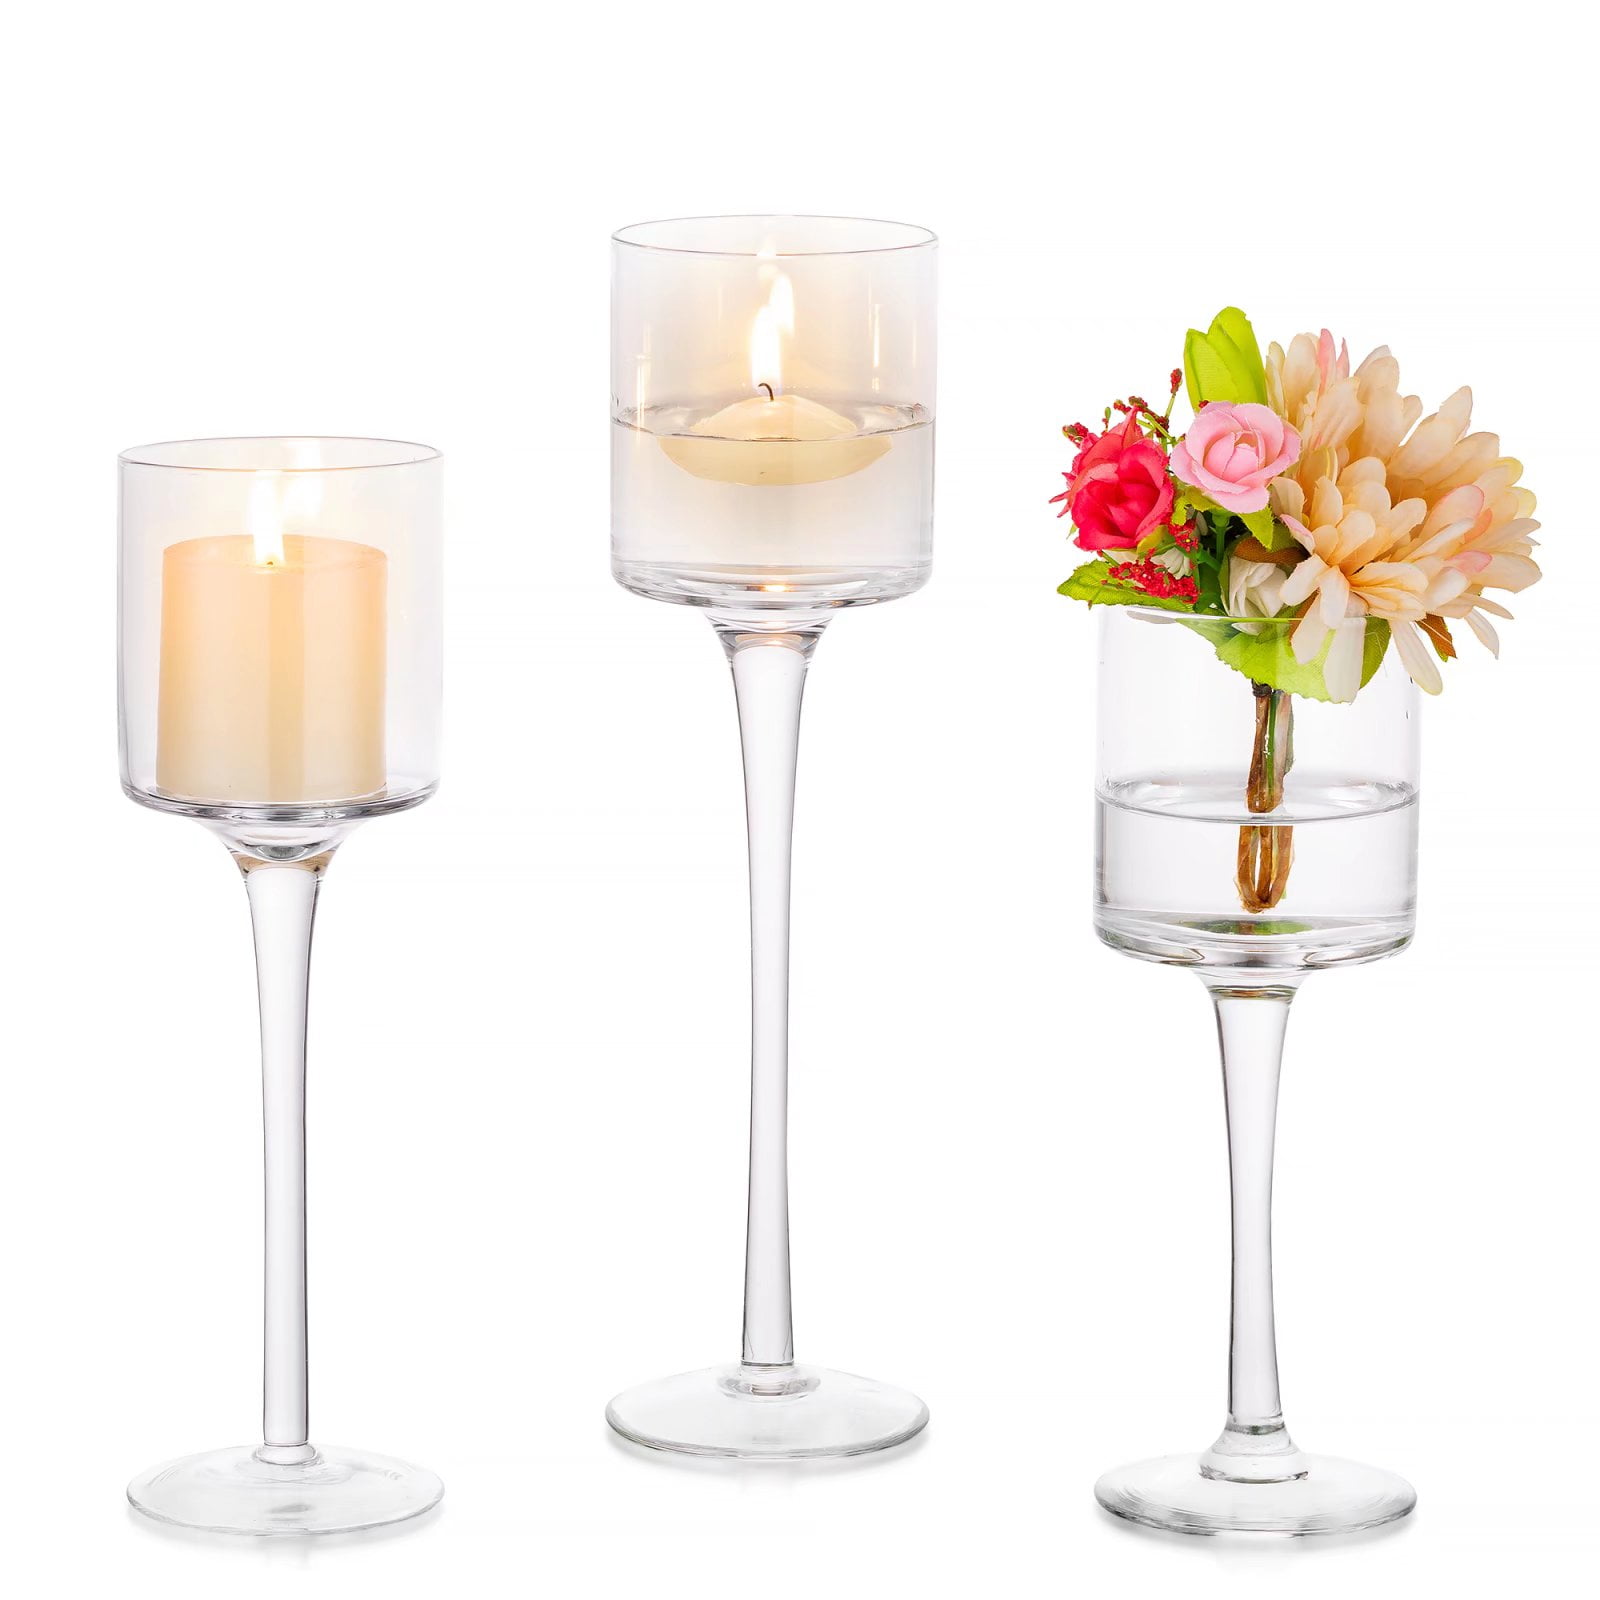 50 White Wax Clear Glass Votive Table Candle Wedding Anniversary Party Event 6cm 